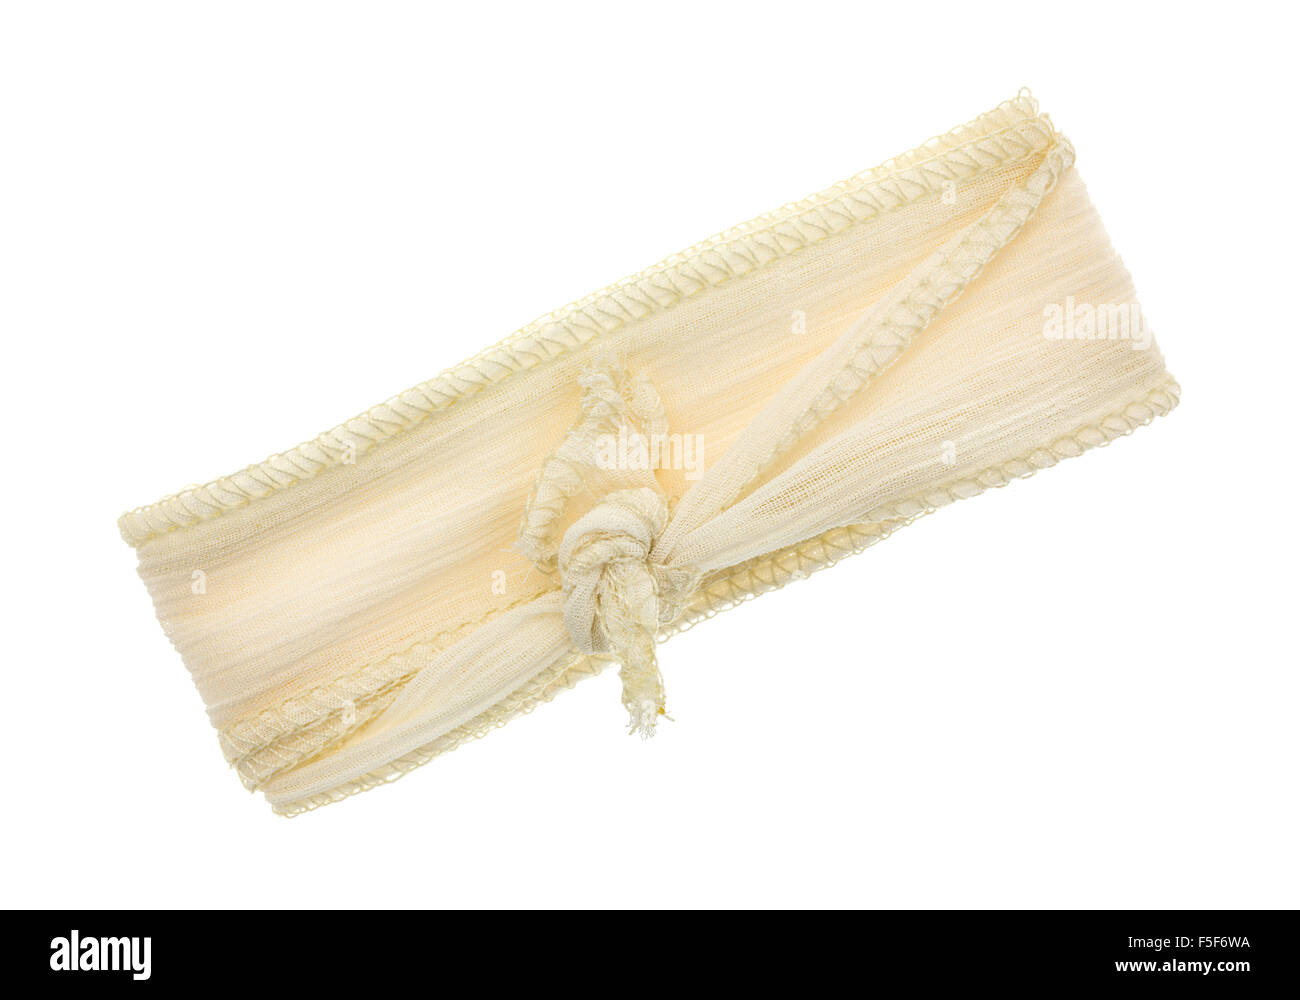 A small length of ivory ribbon cloth with a binding stitch tied isolated on a white background. Stock Photo